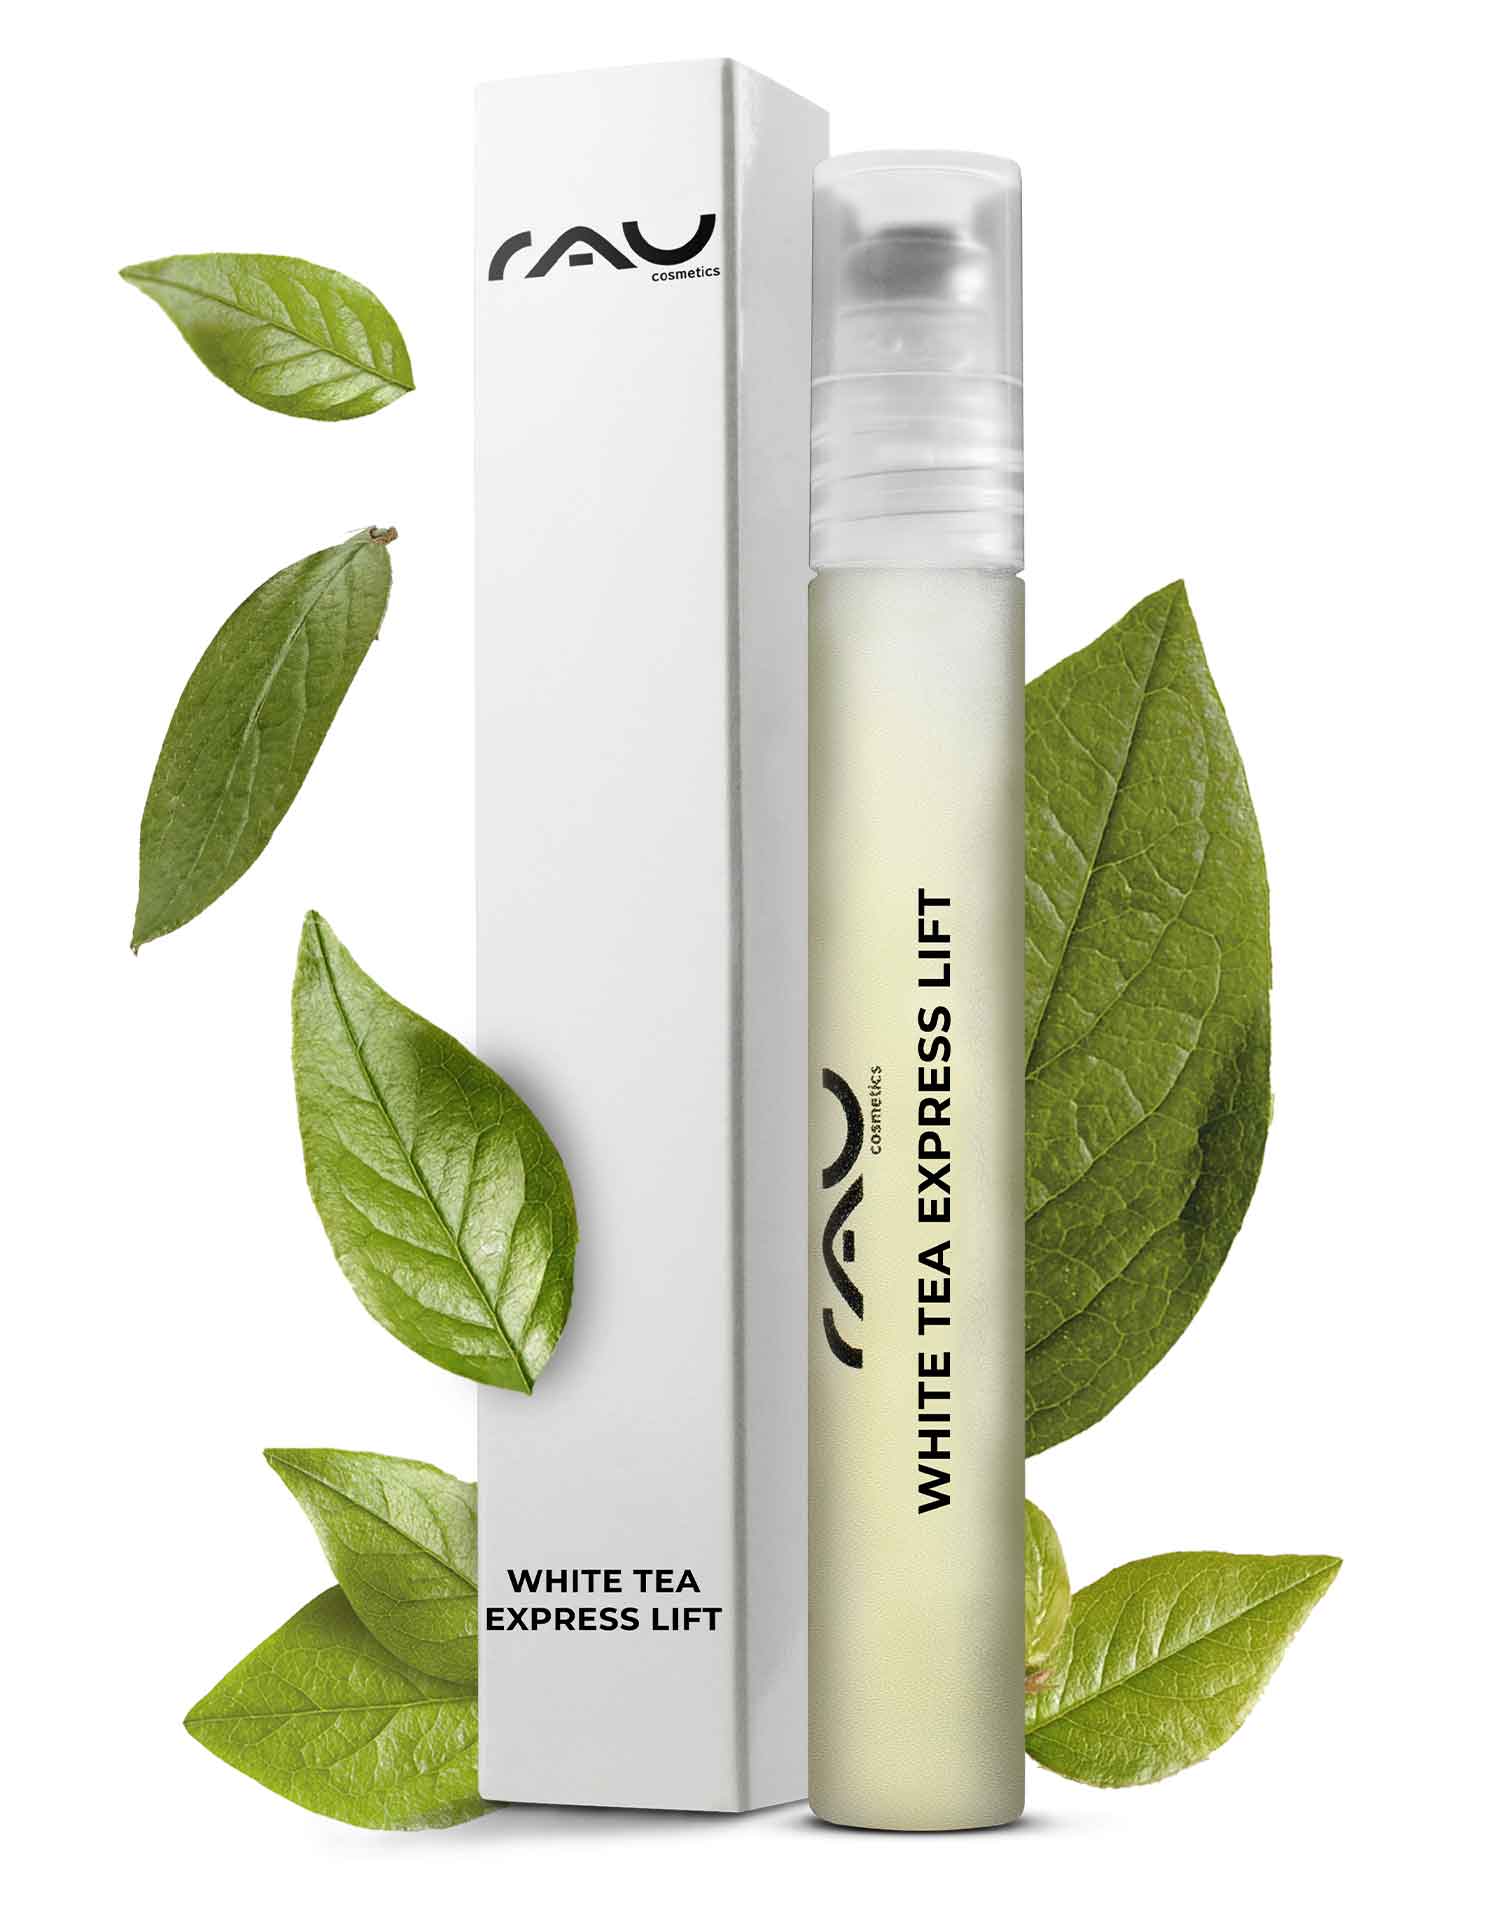 White Tea Express Lift Roll On Anti-Aging Serum in Roll-On